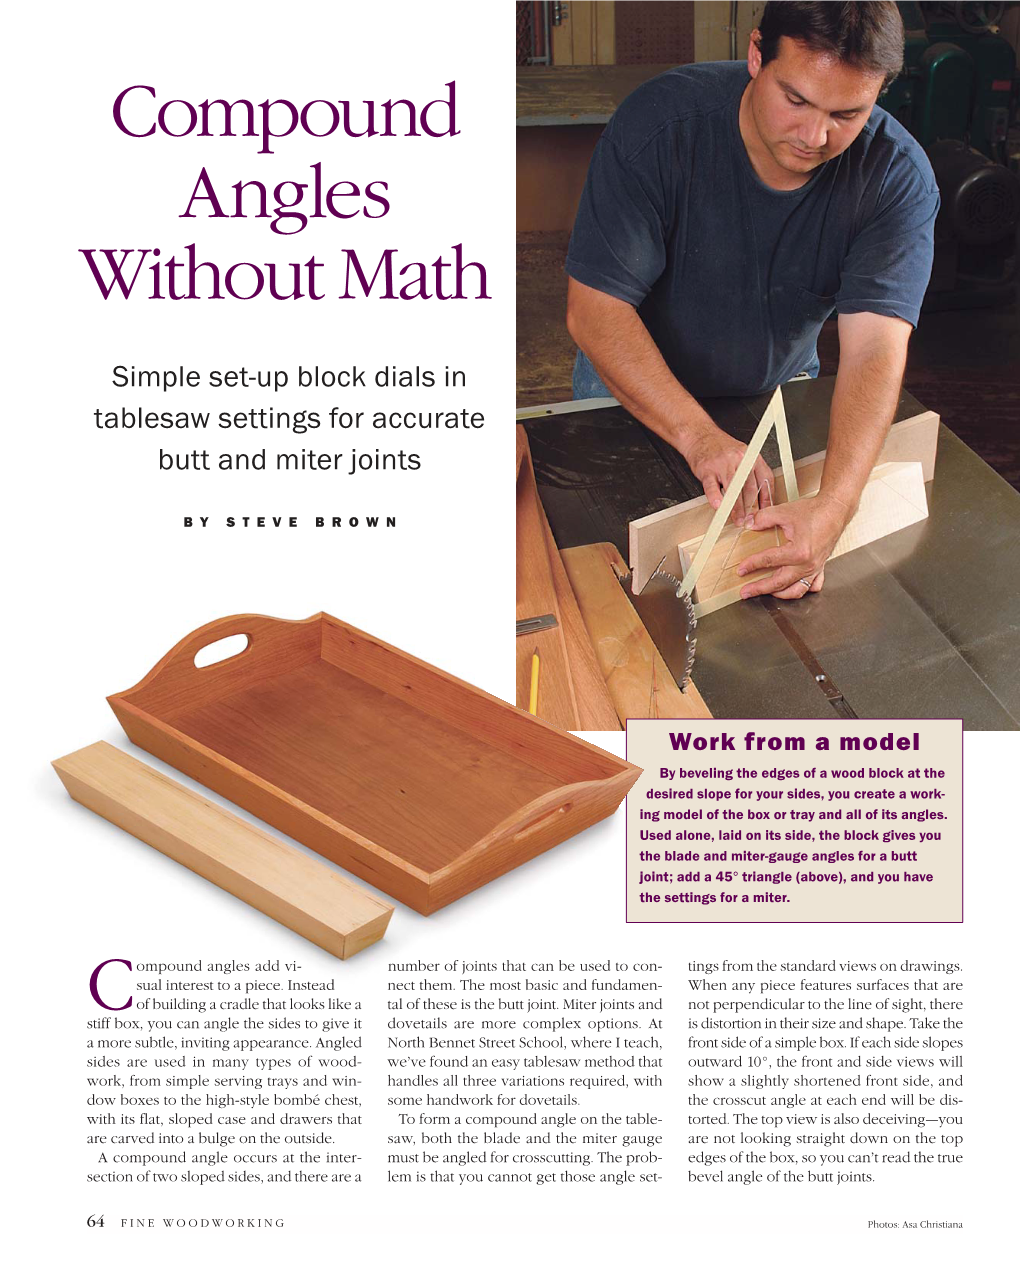 Compound Angles Without Math